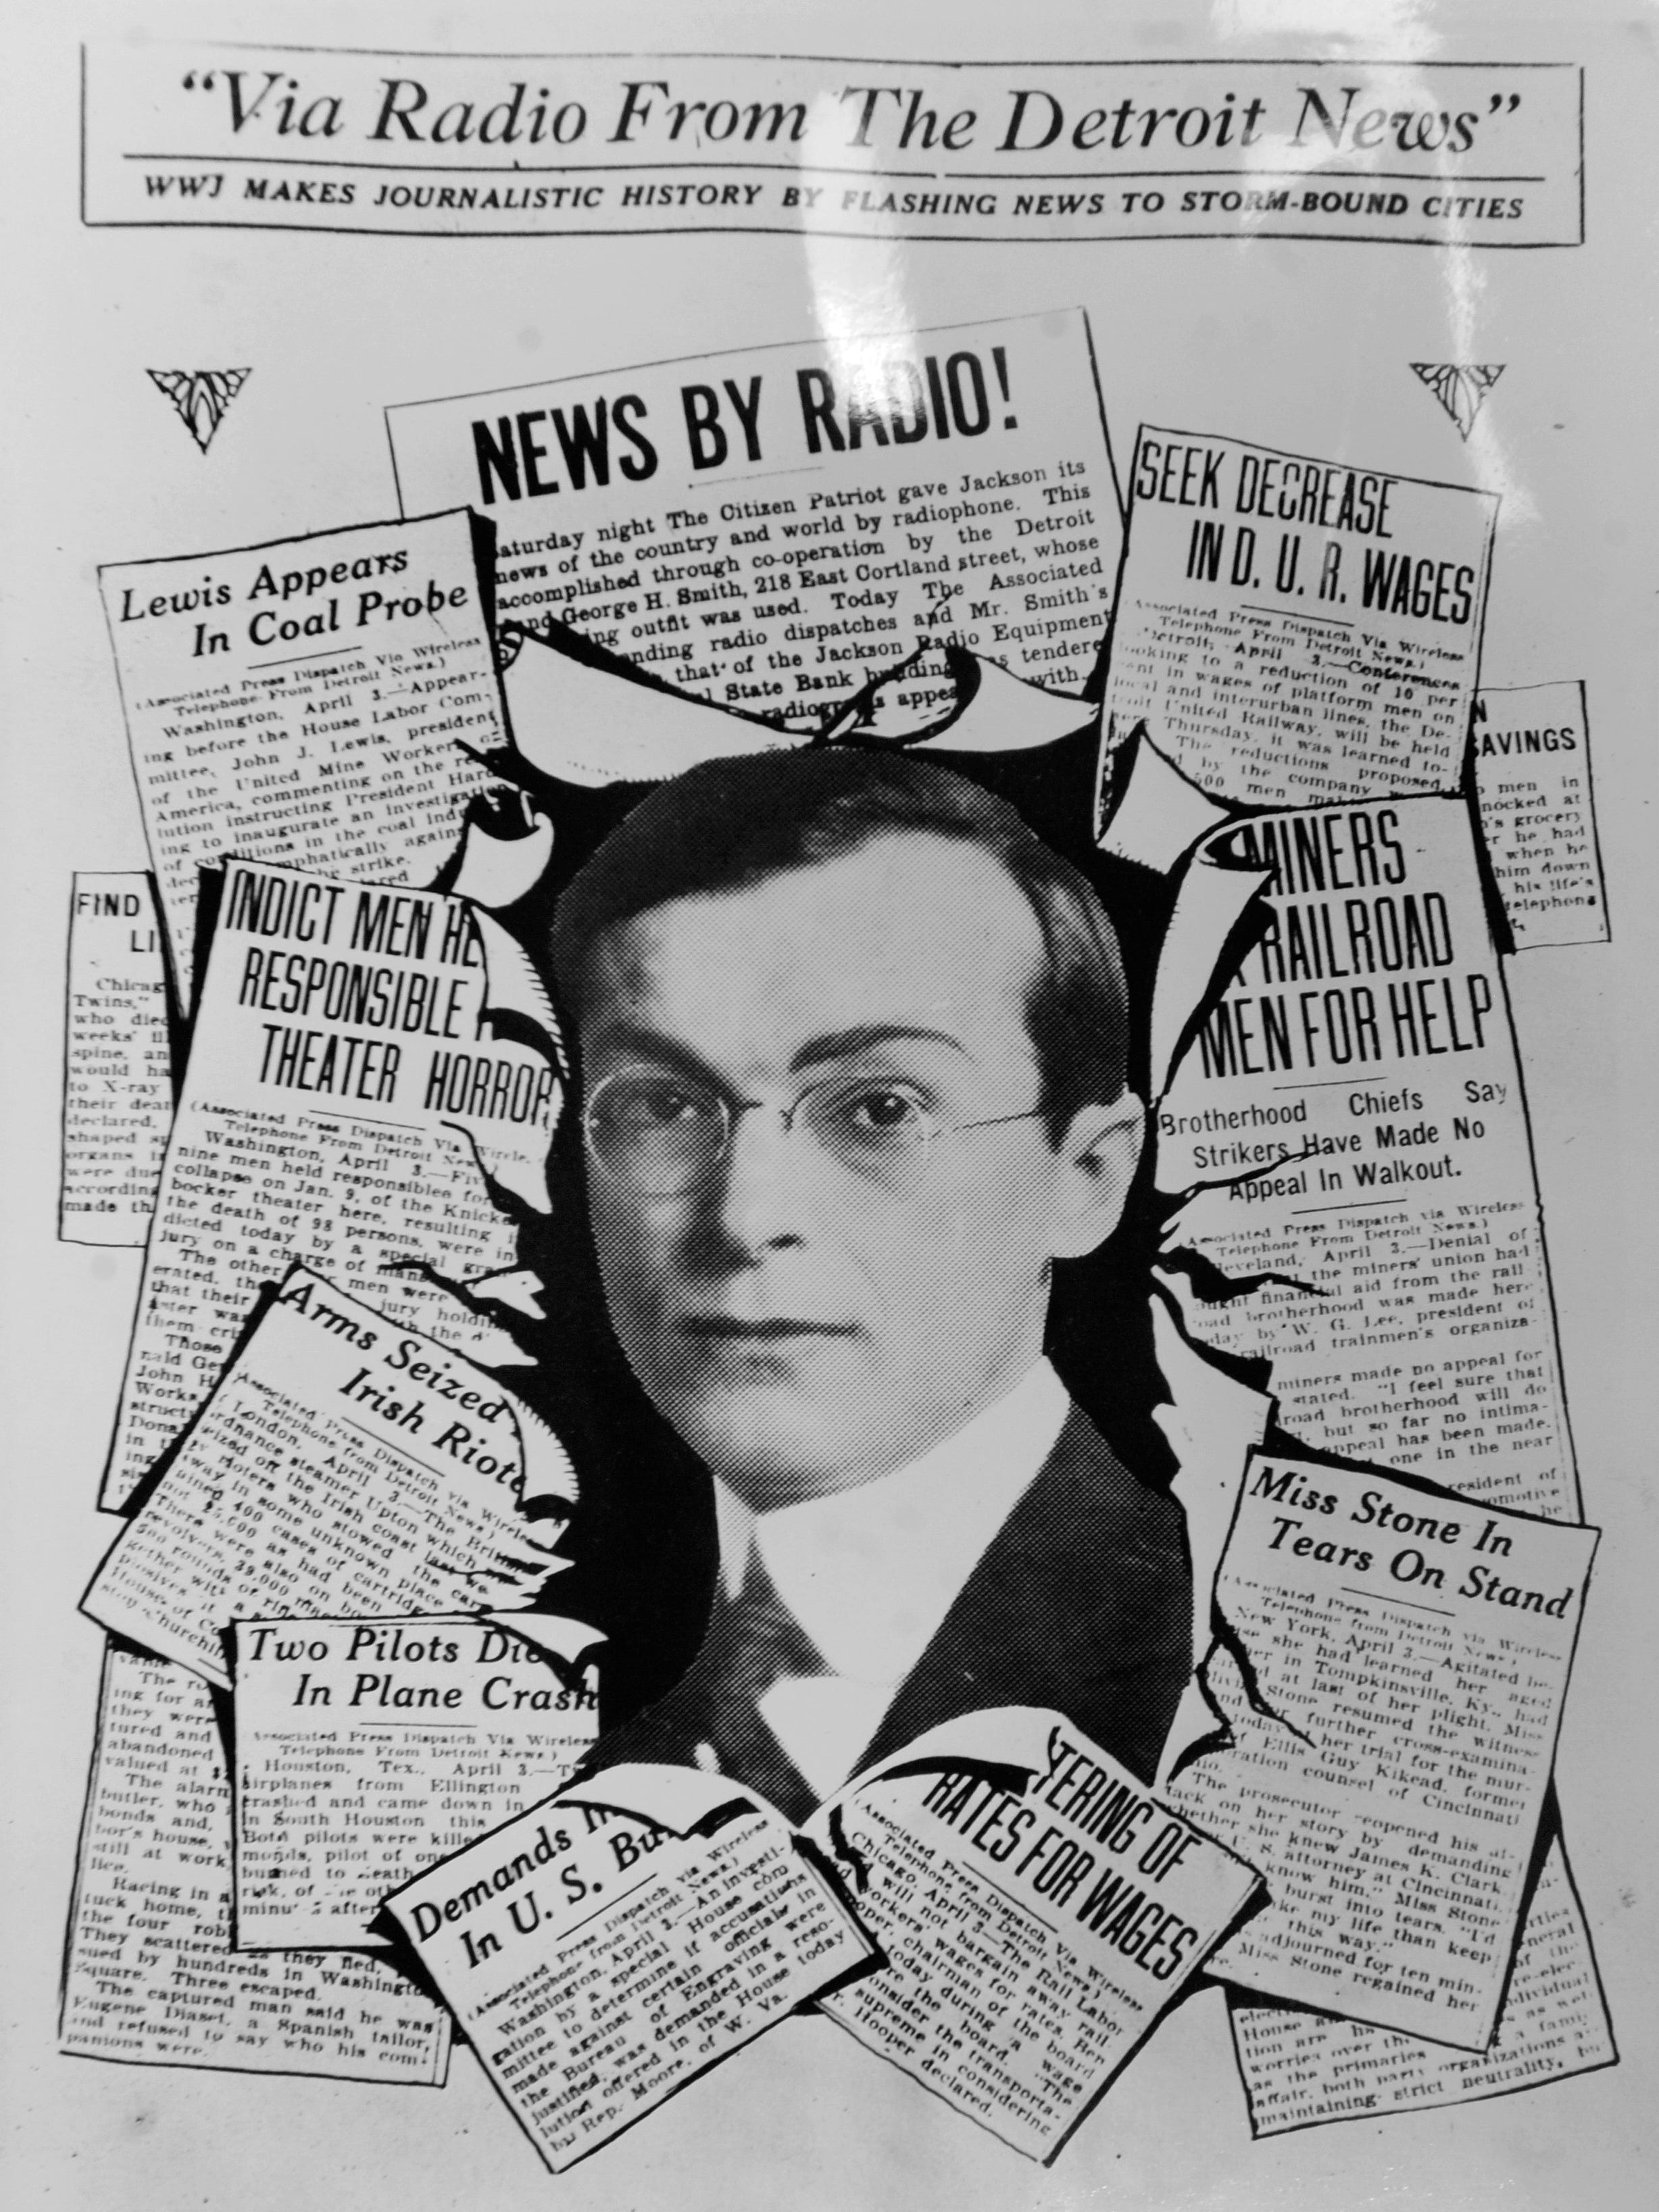 When telephone and telegraph lines were down during a sleet storm in March, 1922, WWJ supplied over-the-air news bulletins to newspapers. "WWJ makes journalistic history by flashing news to storm-bound cities," The Detroit News trumpeted. At center is David Wilkie, the Detroit correspondent of the Associated Press, who wrote the news bulletins.